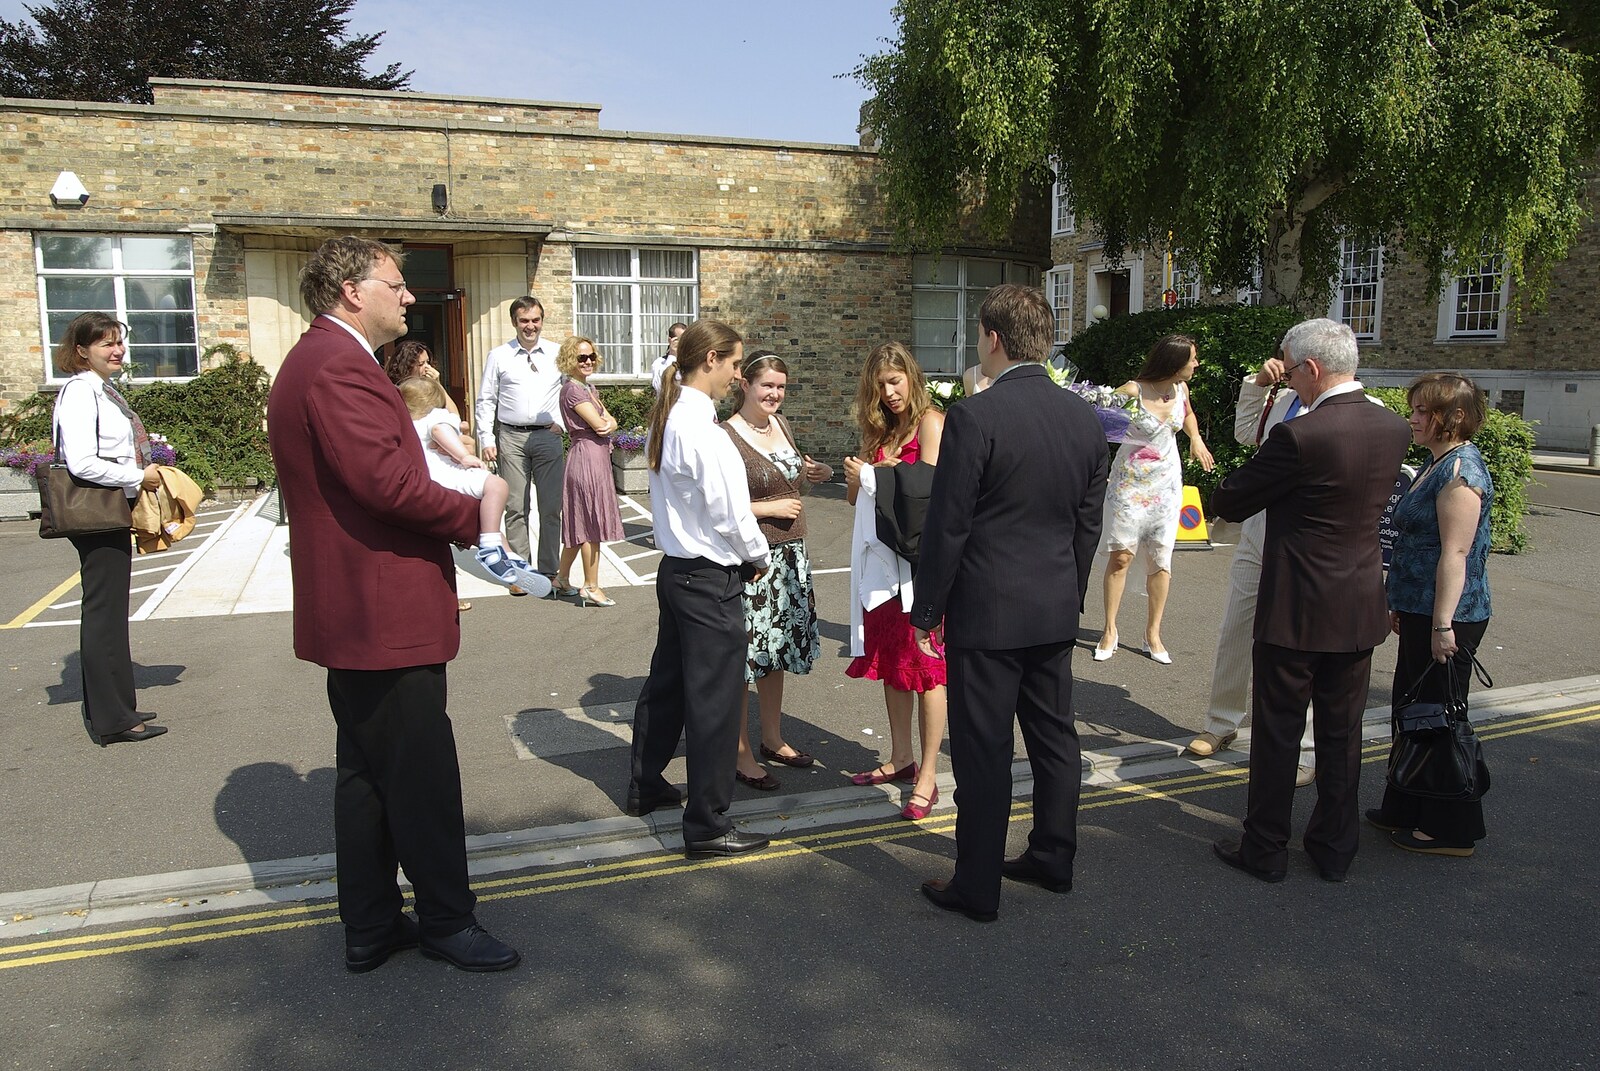 Liviu and Christina's Wedding Day, Babraham, Cambridge - 11th August 2007: Outside the Register Office